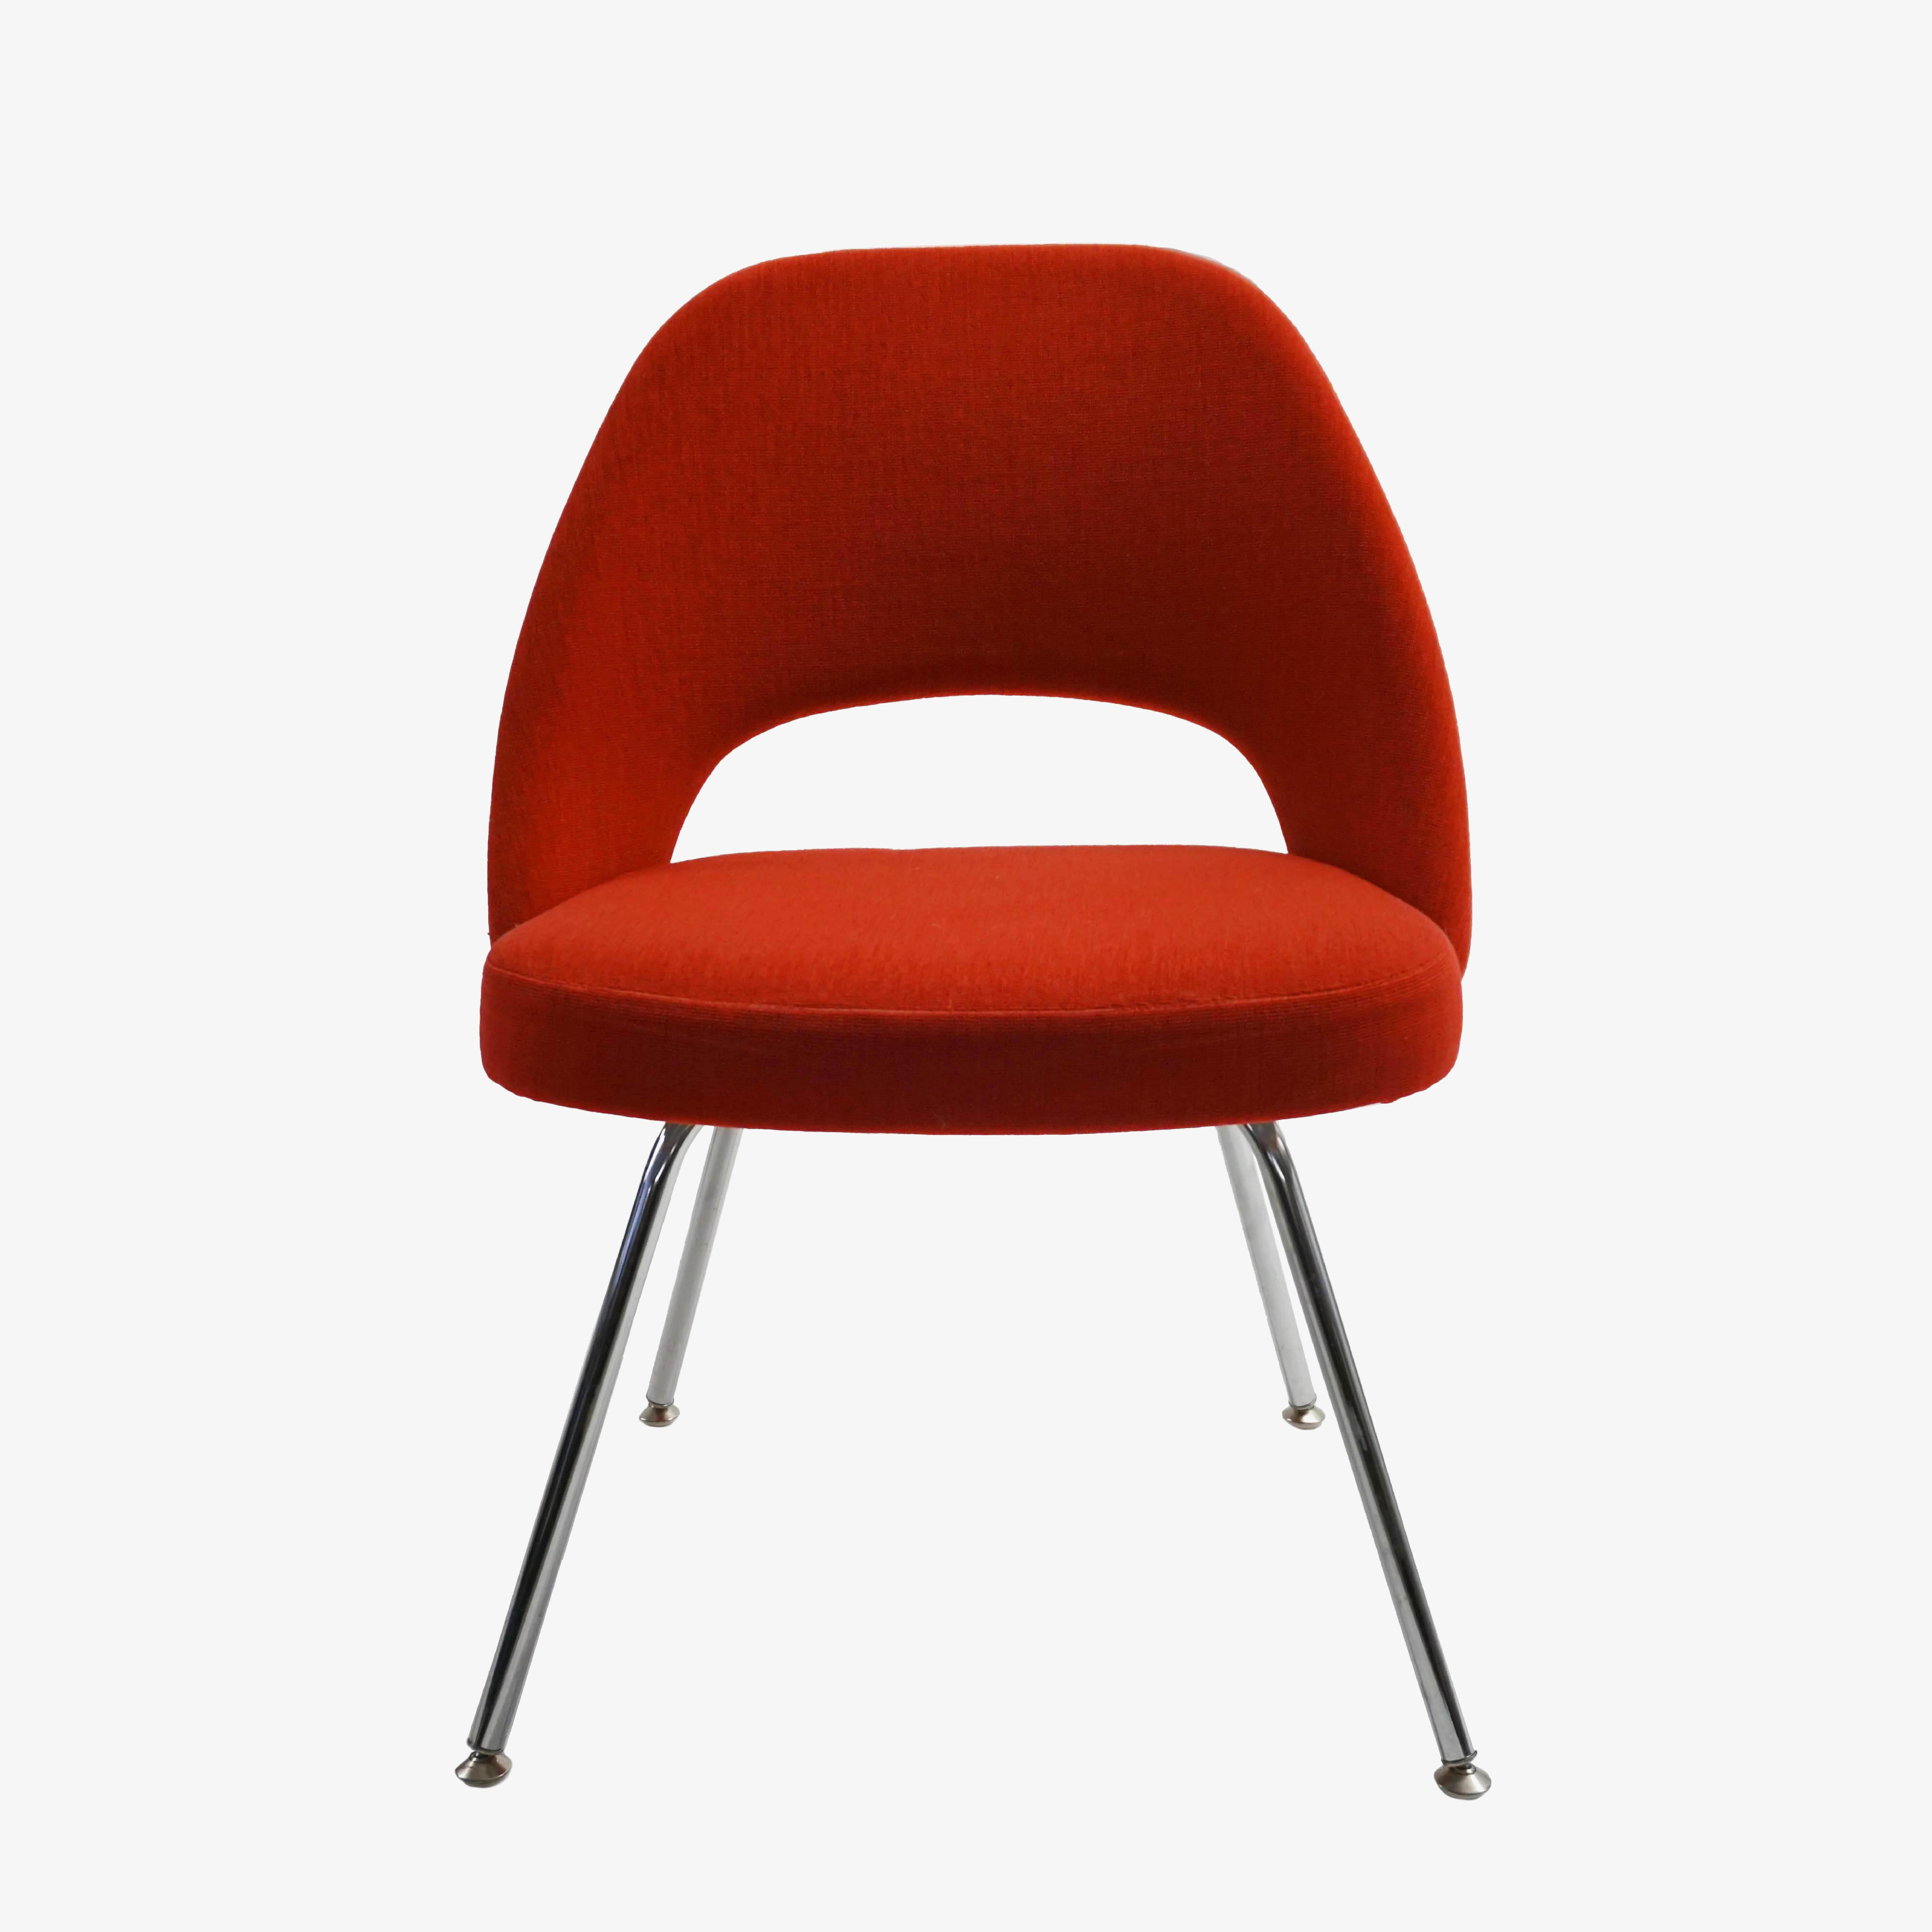 100% authentic, pre-owned Eero Saarinen for Knoll Executive Armless Chair in its original Fire Red fabric upholstery. Featuring chrome tubular legs in excellent condition. We have many available. Suitable for any room in the house or office. 